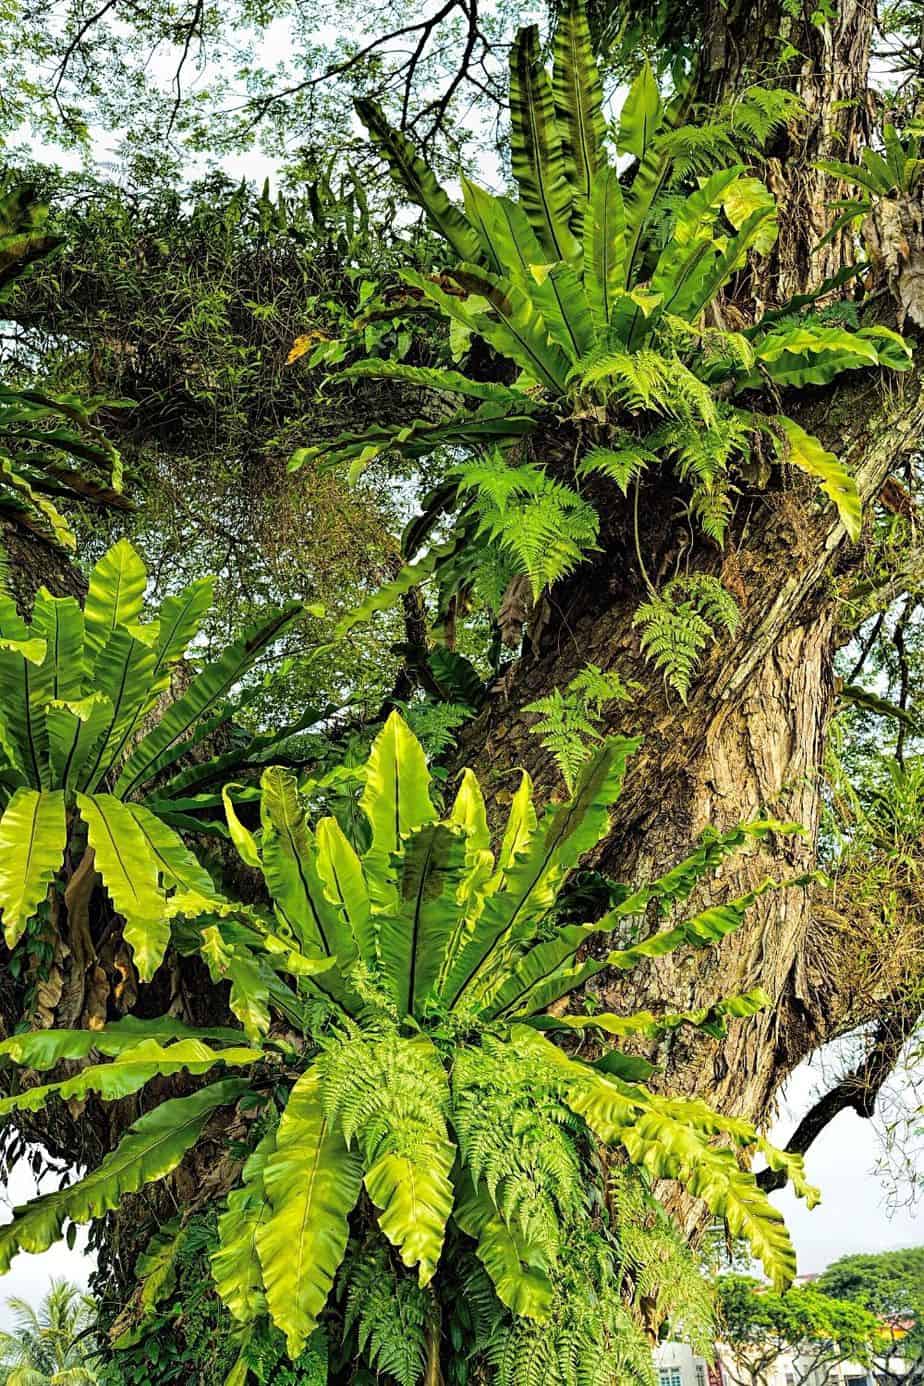 Since Bird’s nest ferns grow with their roots attached to trees, they thrive in the indirect light they're receiving when grown near northeast-facing windows